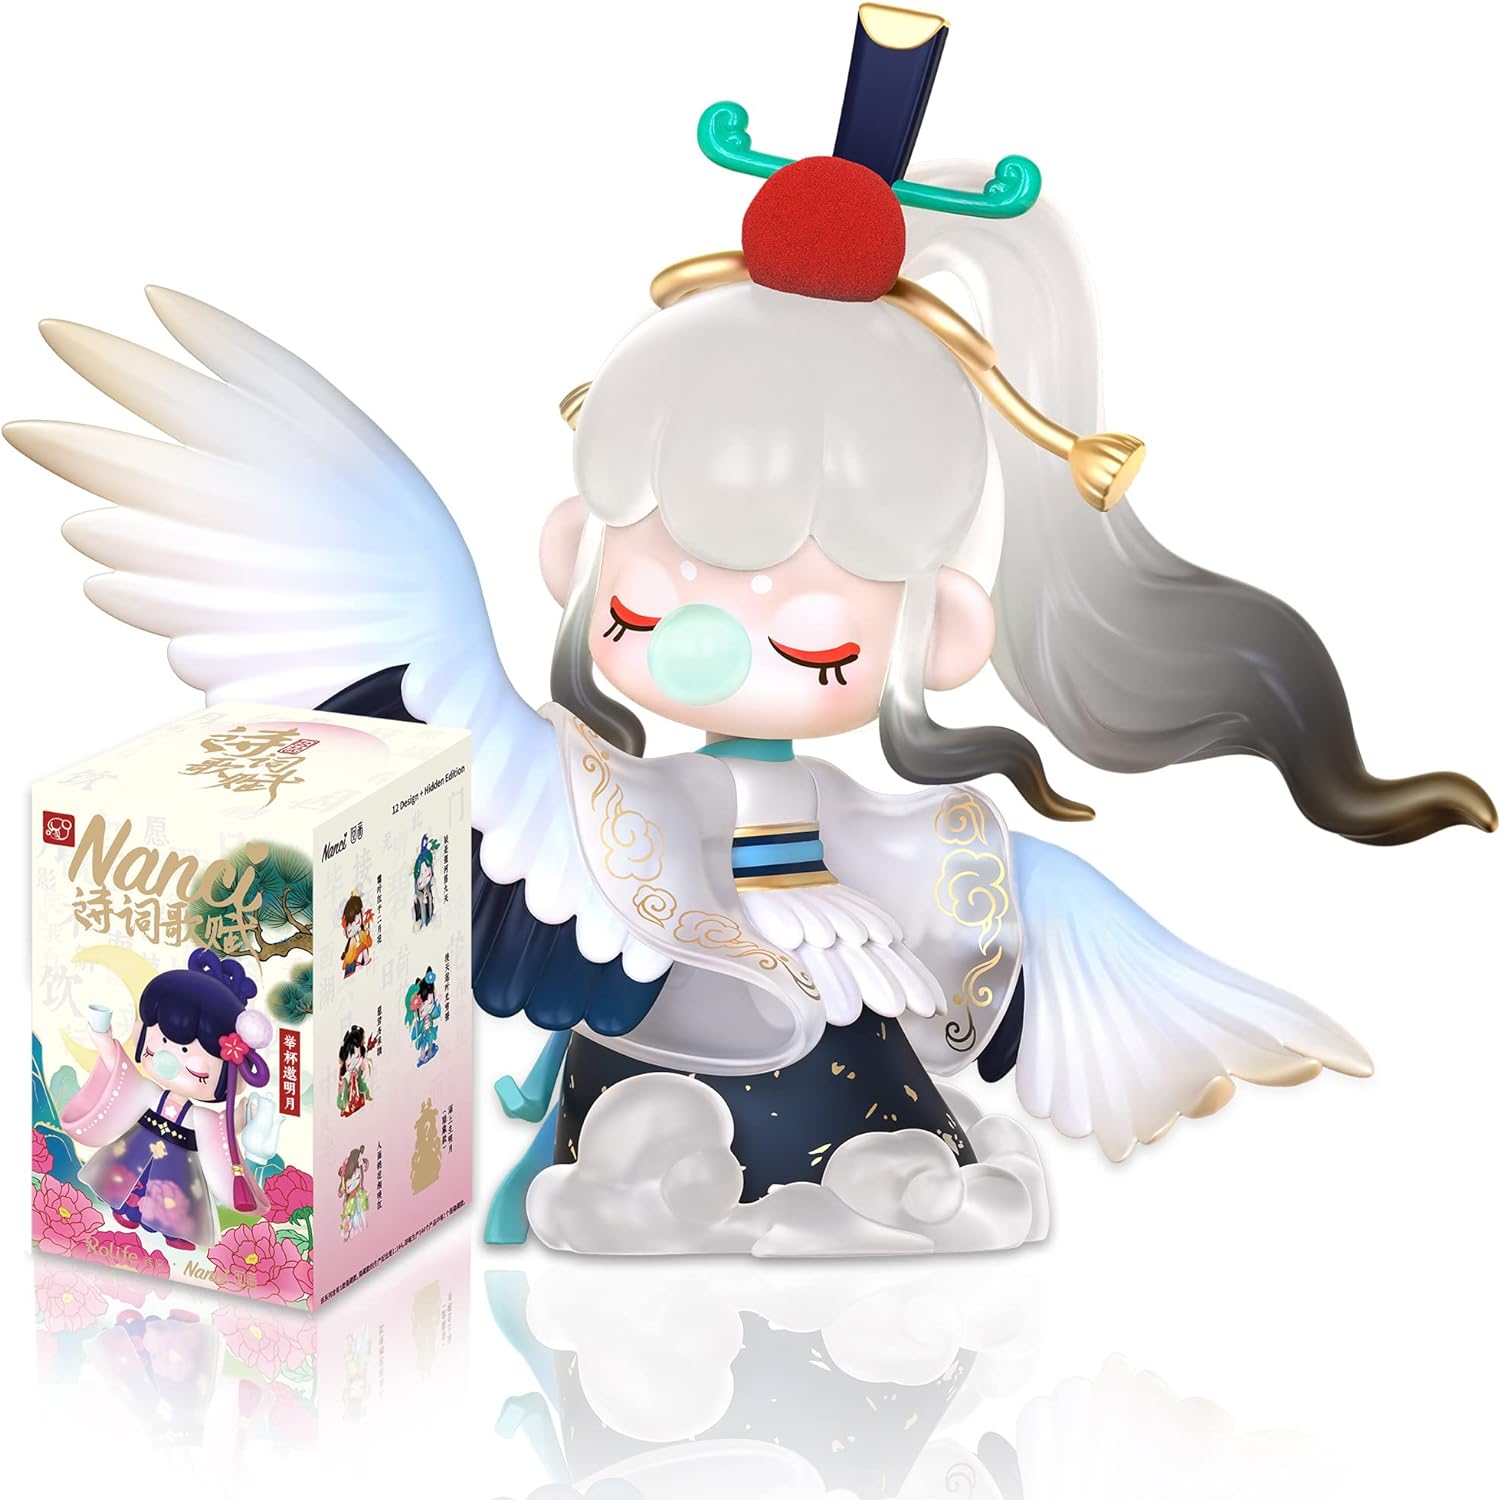 Rolife Nanci Blind Box-Chinese Poetry-Cute Action Figure-Kawaii Figures Blind Bags Creative Gift for Girls and Women